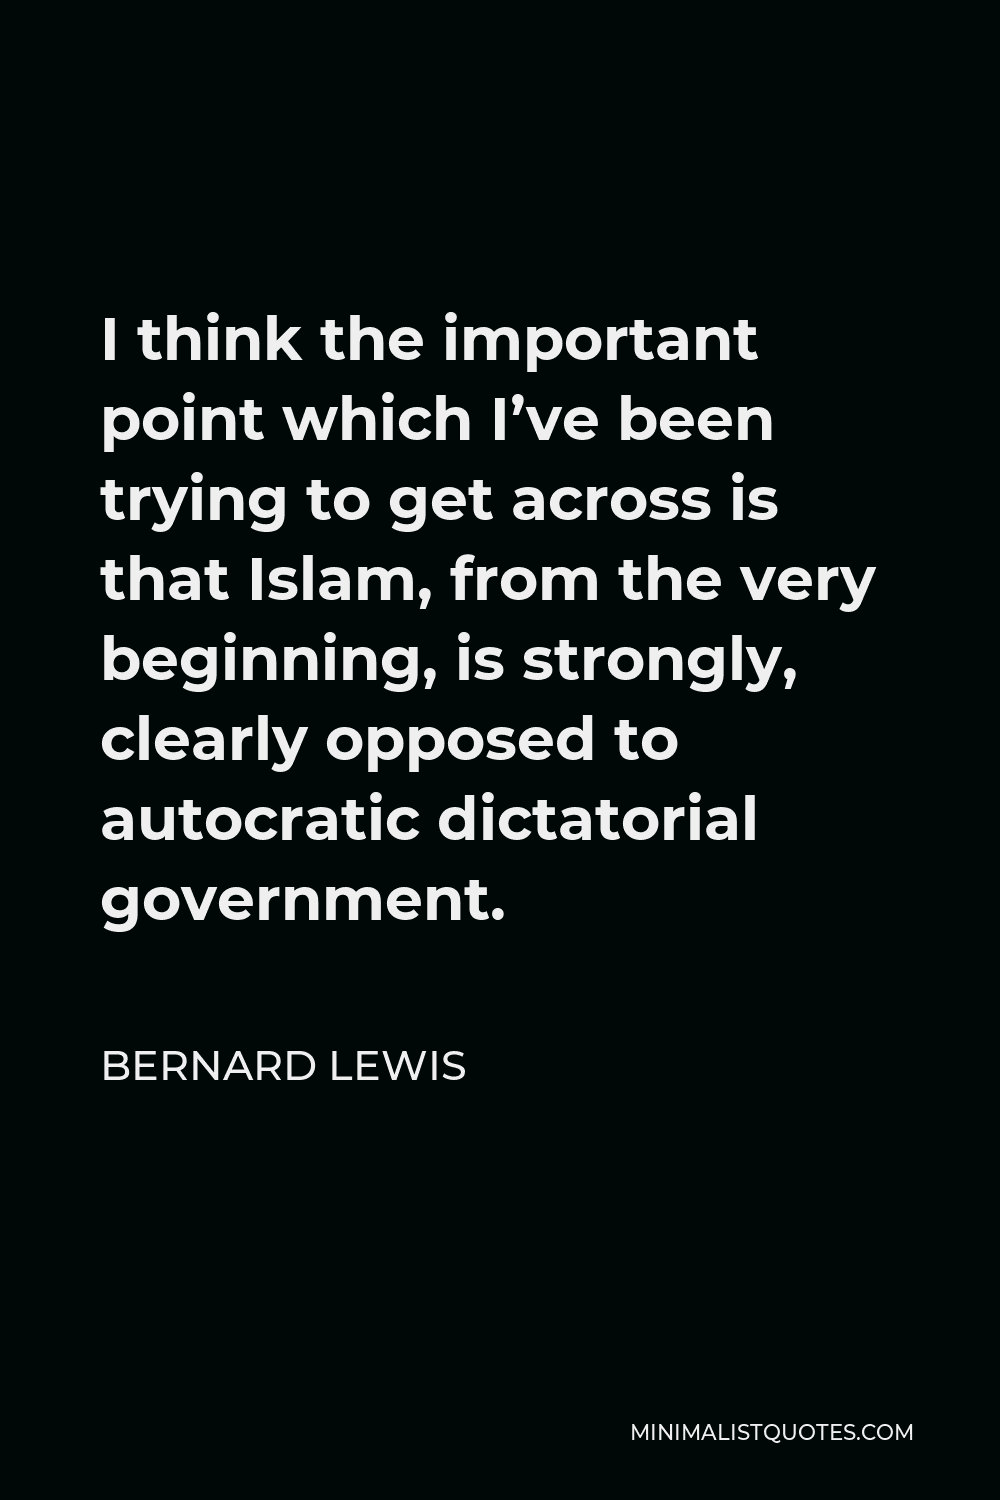 Bernard Lewis Quote - I think the important point which I’ve been trying to get across is that Islam, from the very beginning, is strongly, clearly opposed to autocratic dictatorial government.